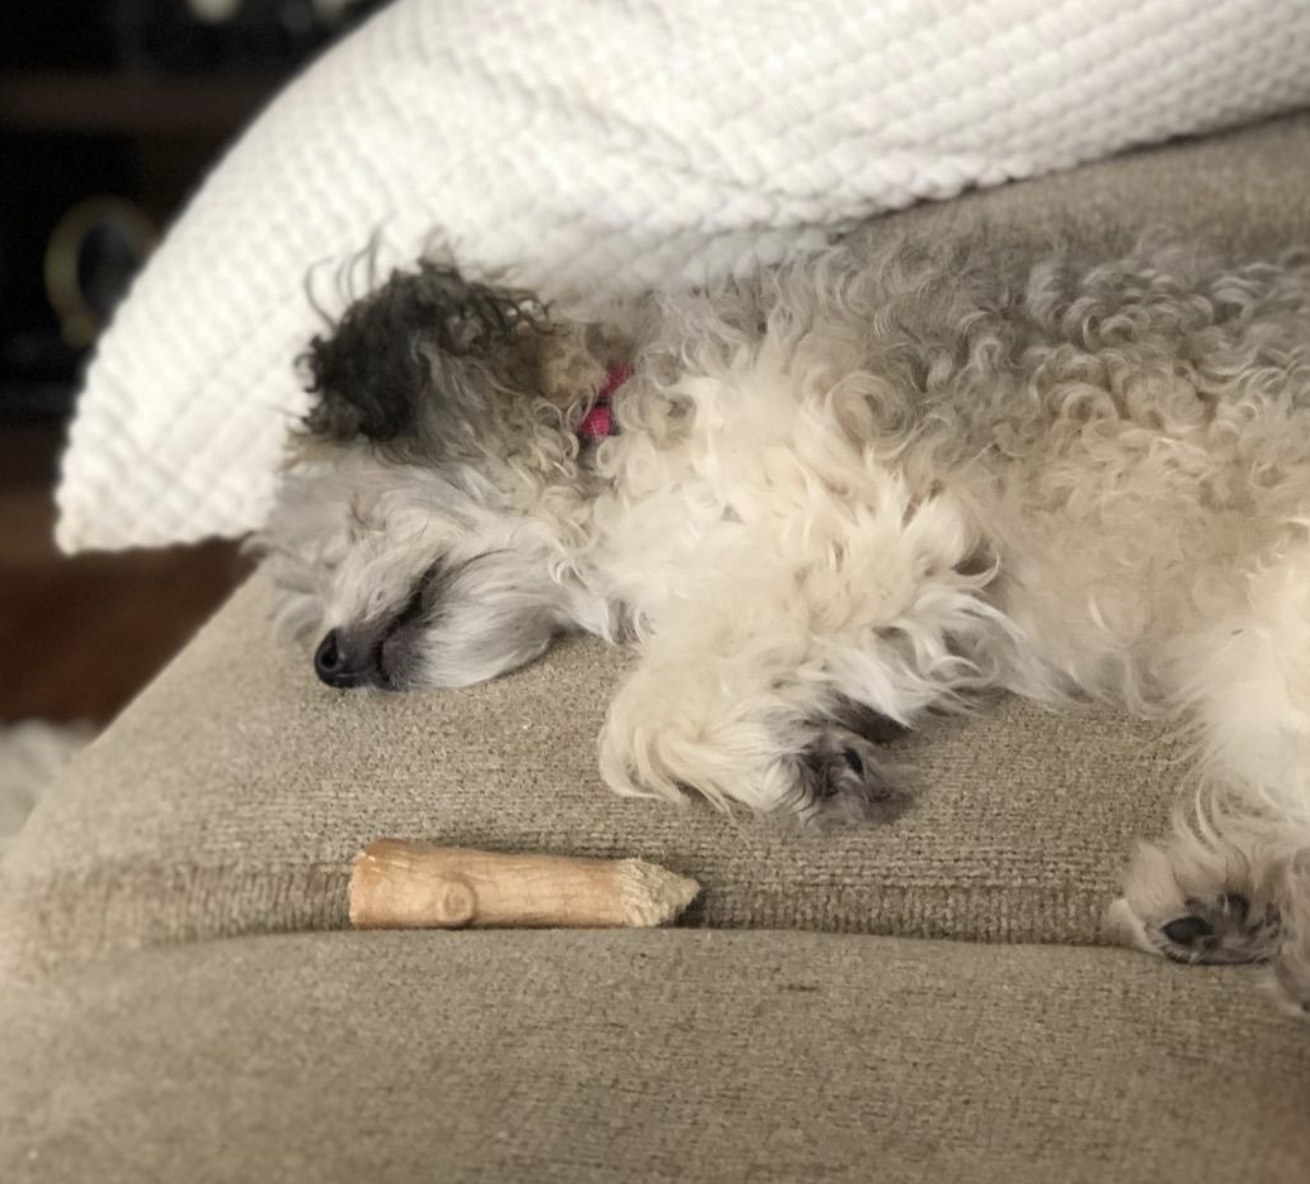 A dog napping next to a chew toy